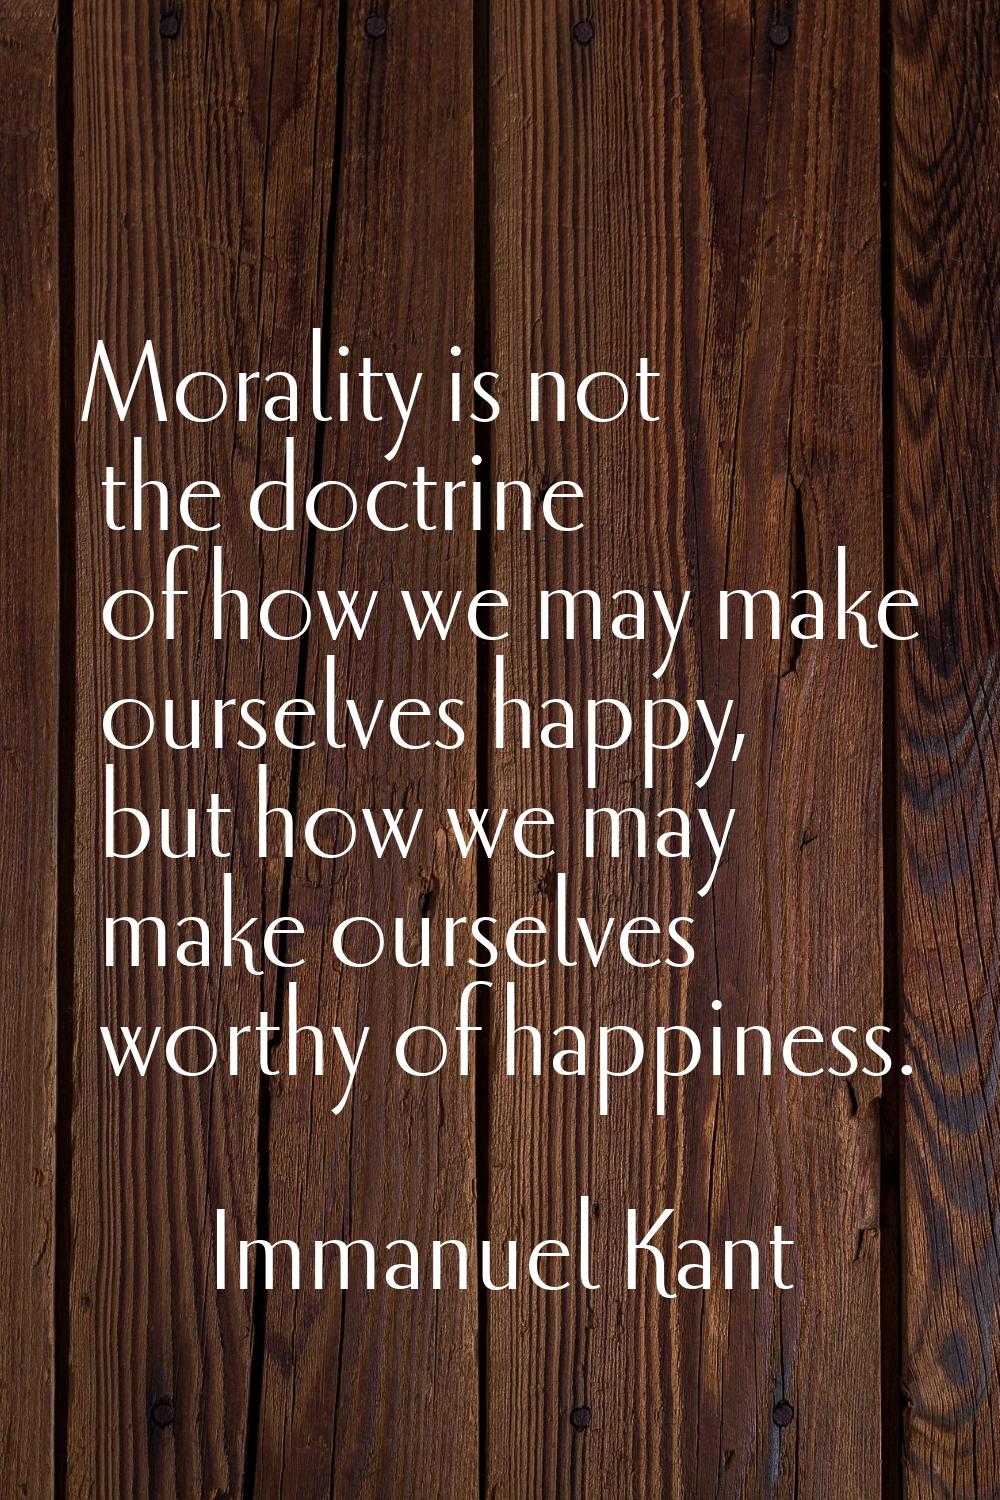 Morality is not the doctrine of how we may make ourselves happy, but how we may make ourselves wort